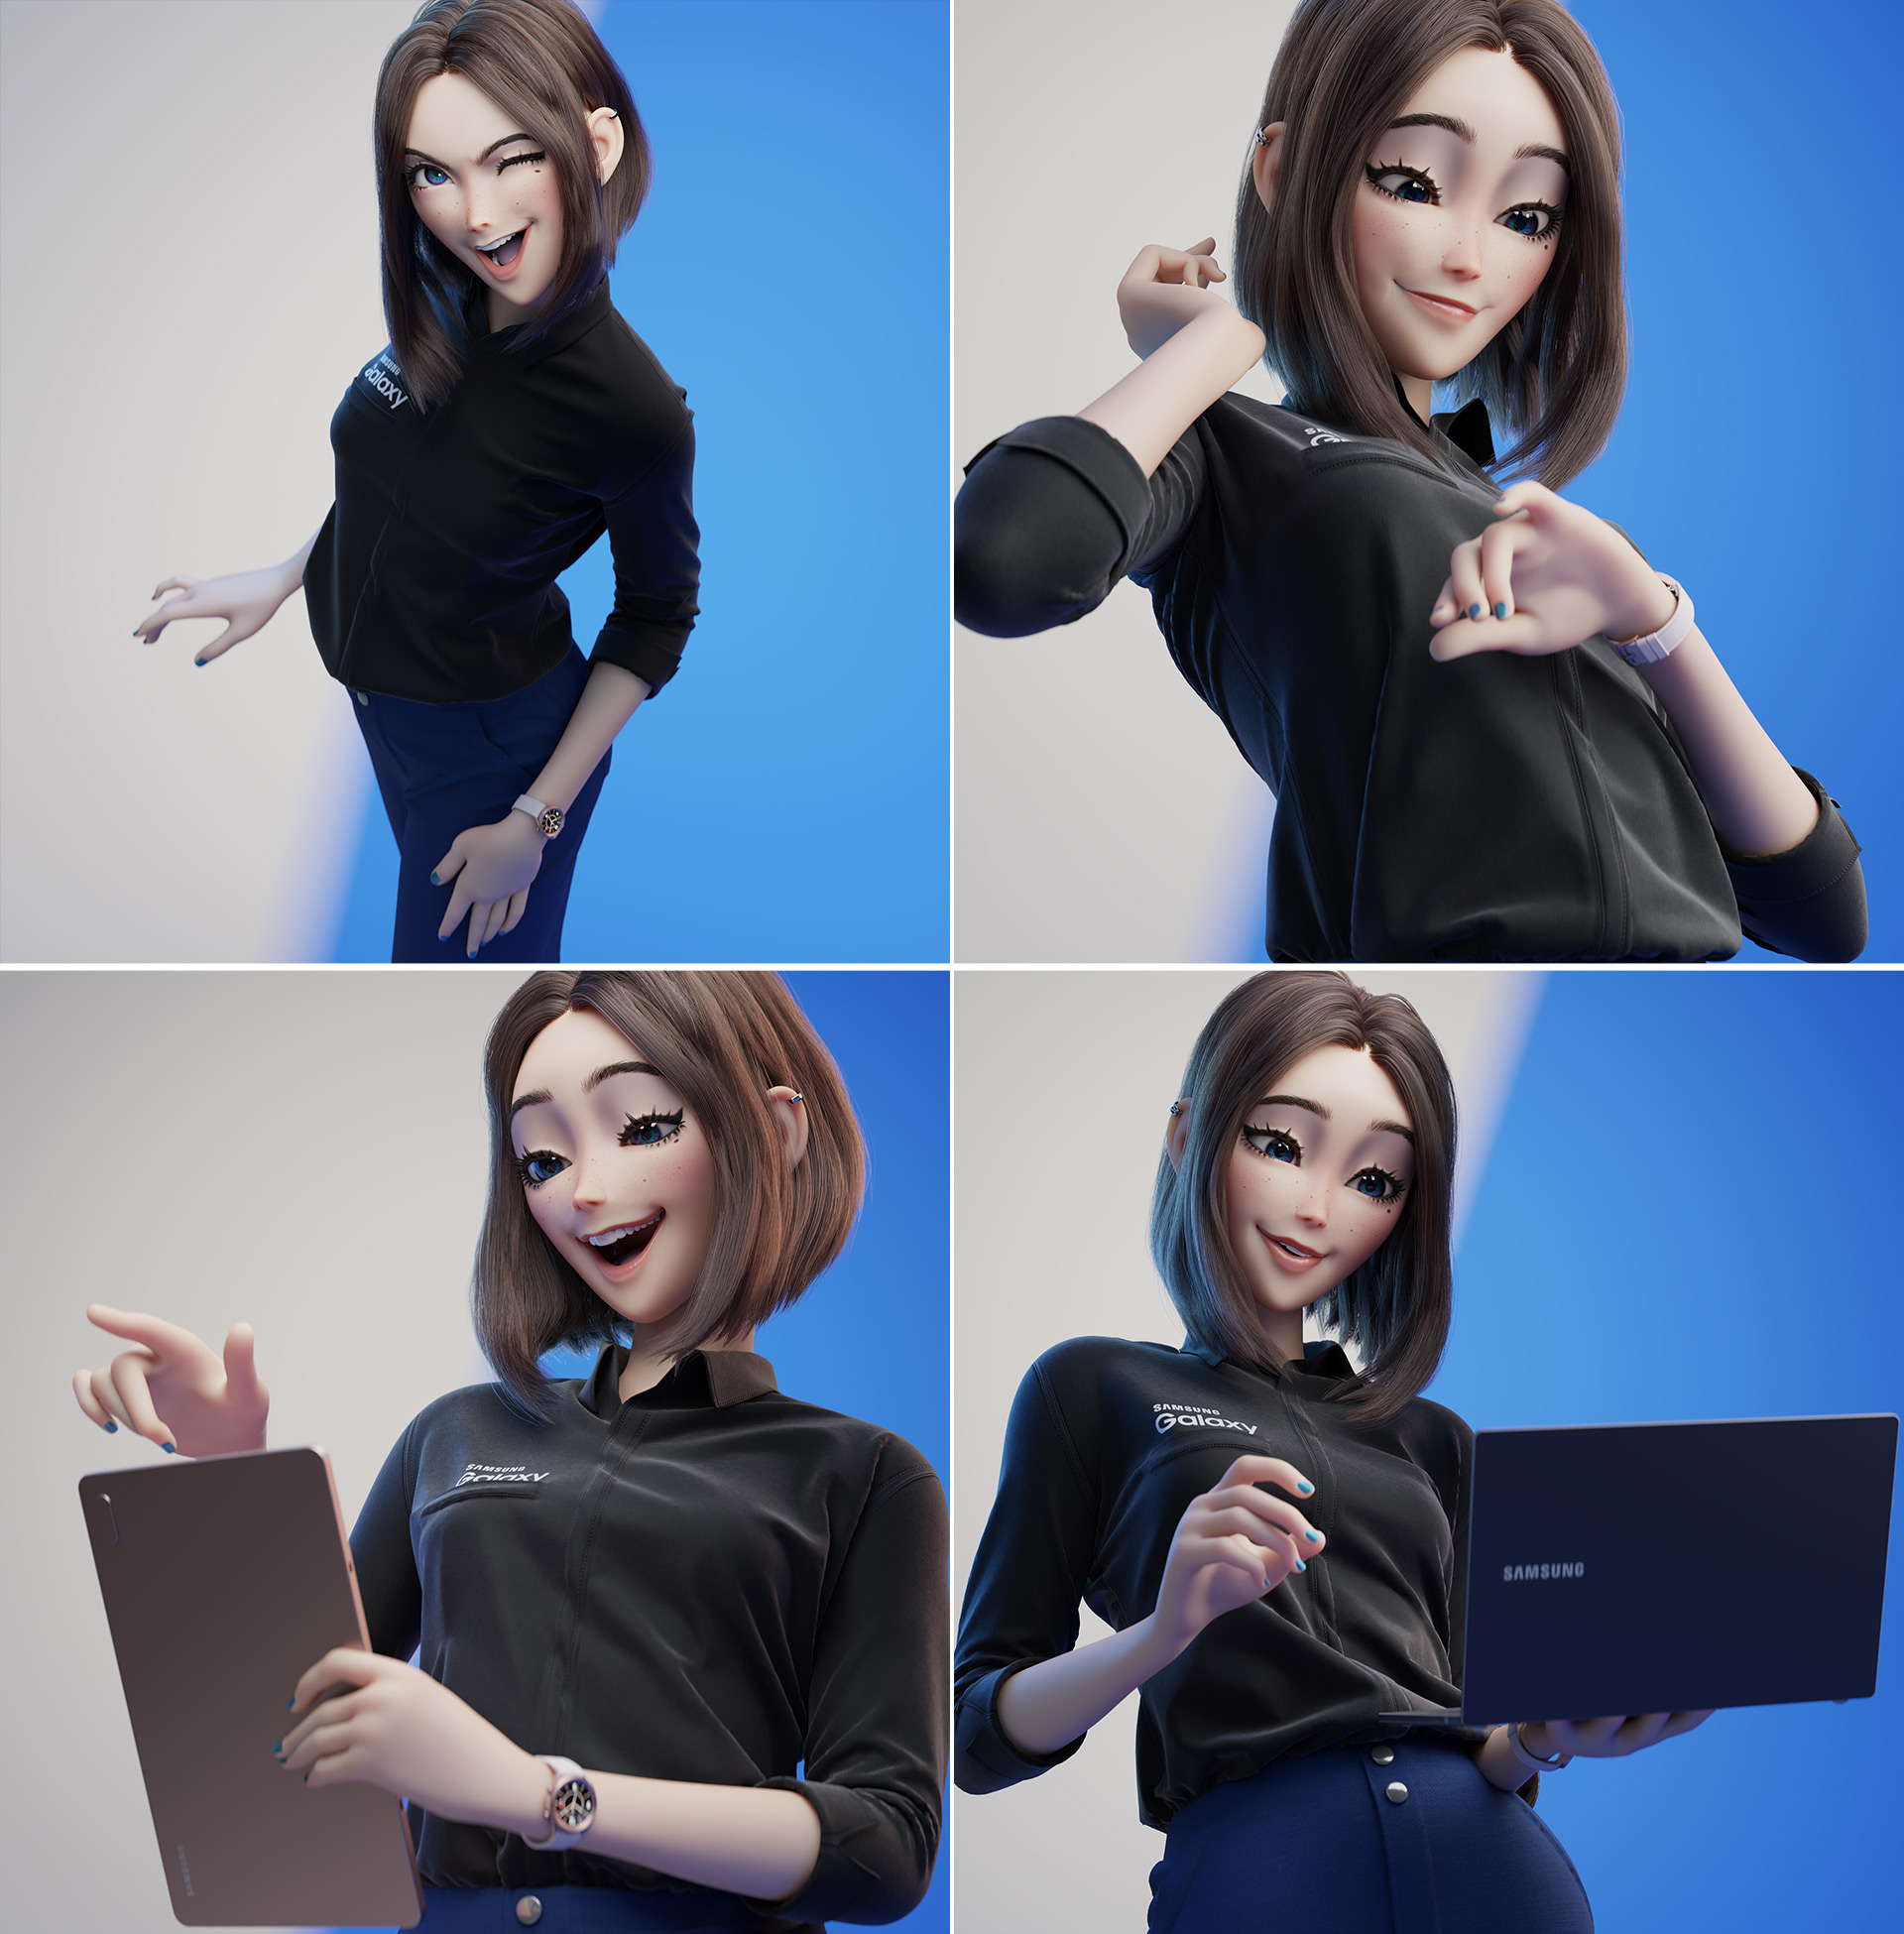 New 3D virtual assistant 'Sam' starts promoting Samsung products